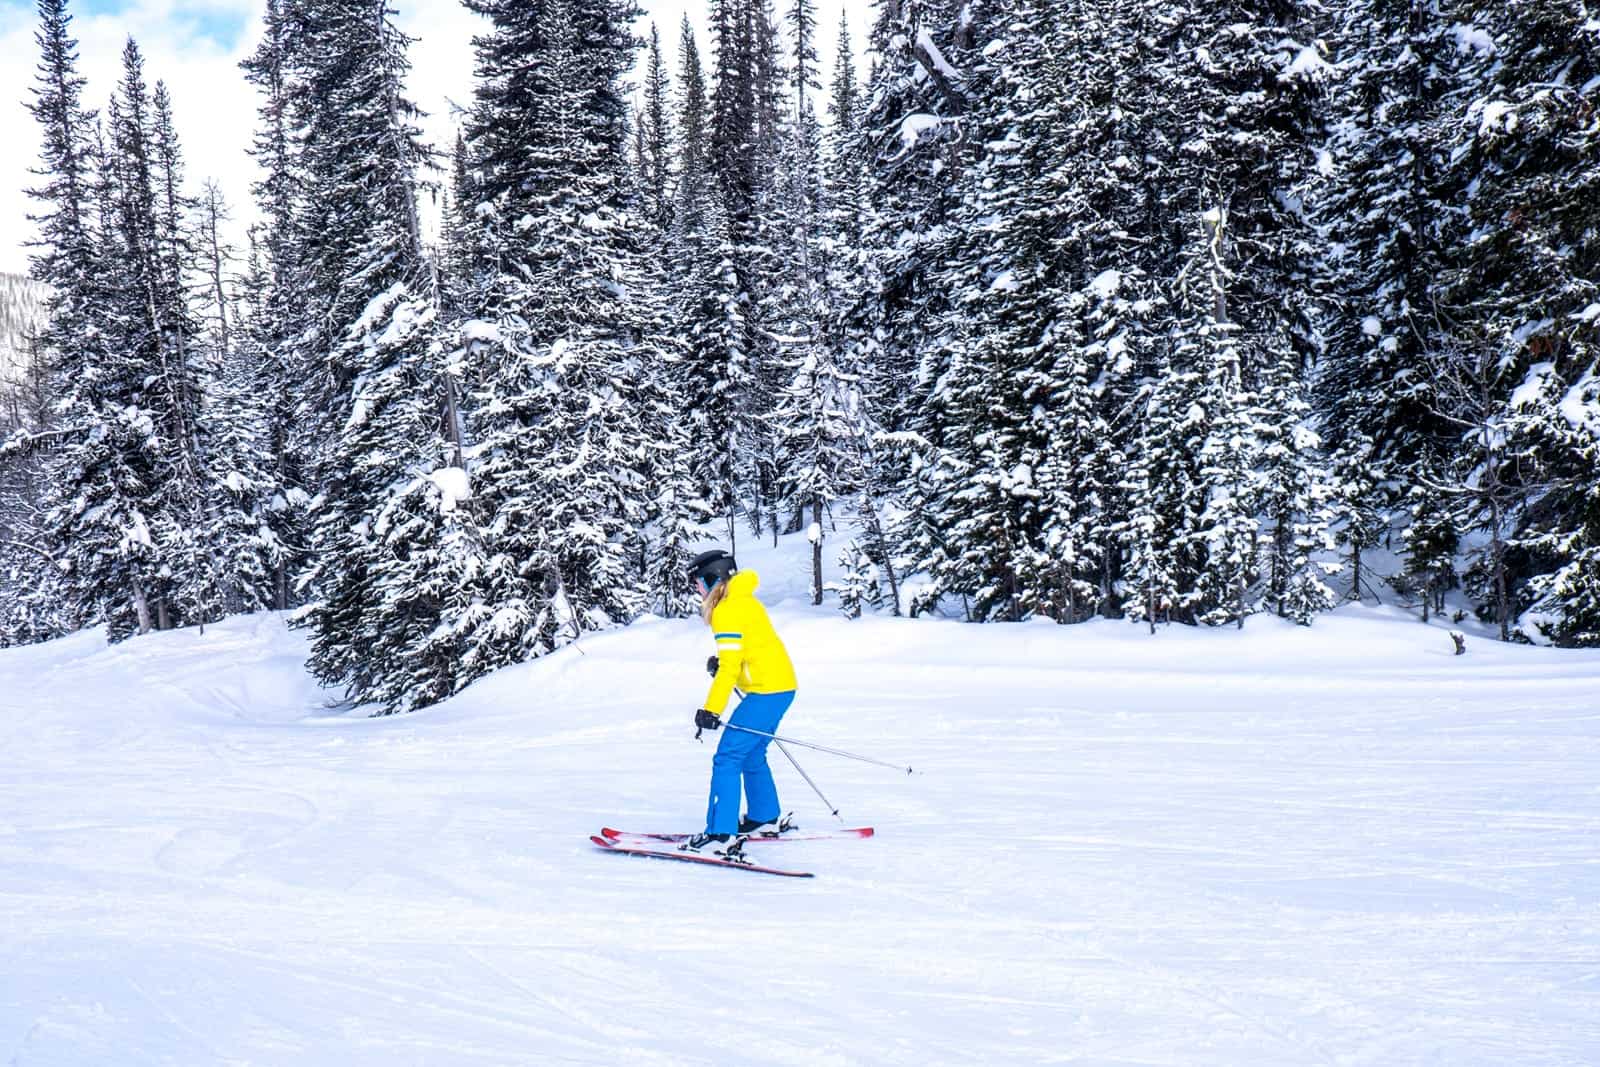 Learning to ski on the blue slopes in Banff in winter